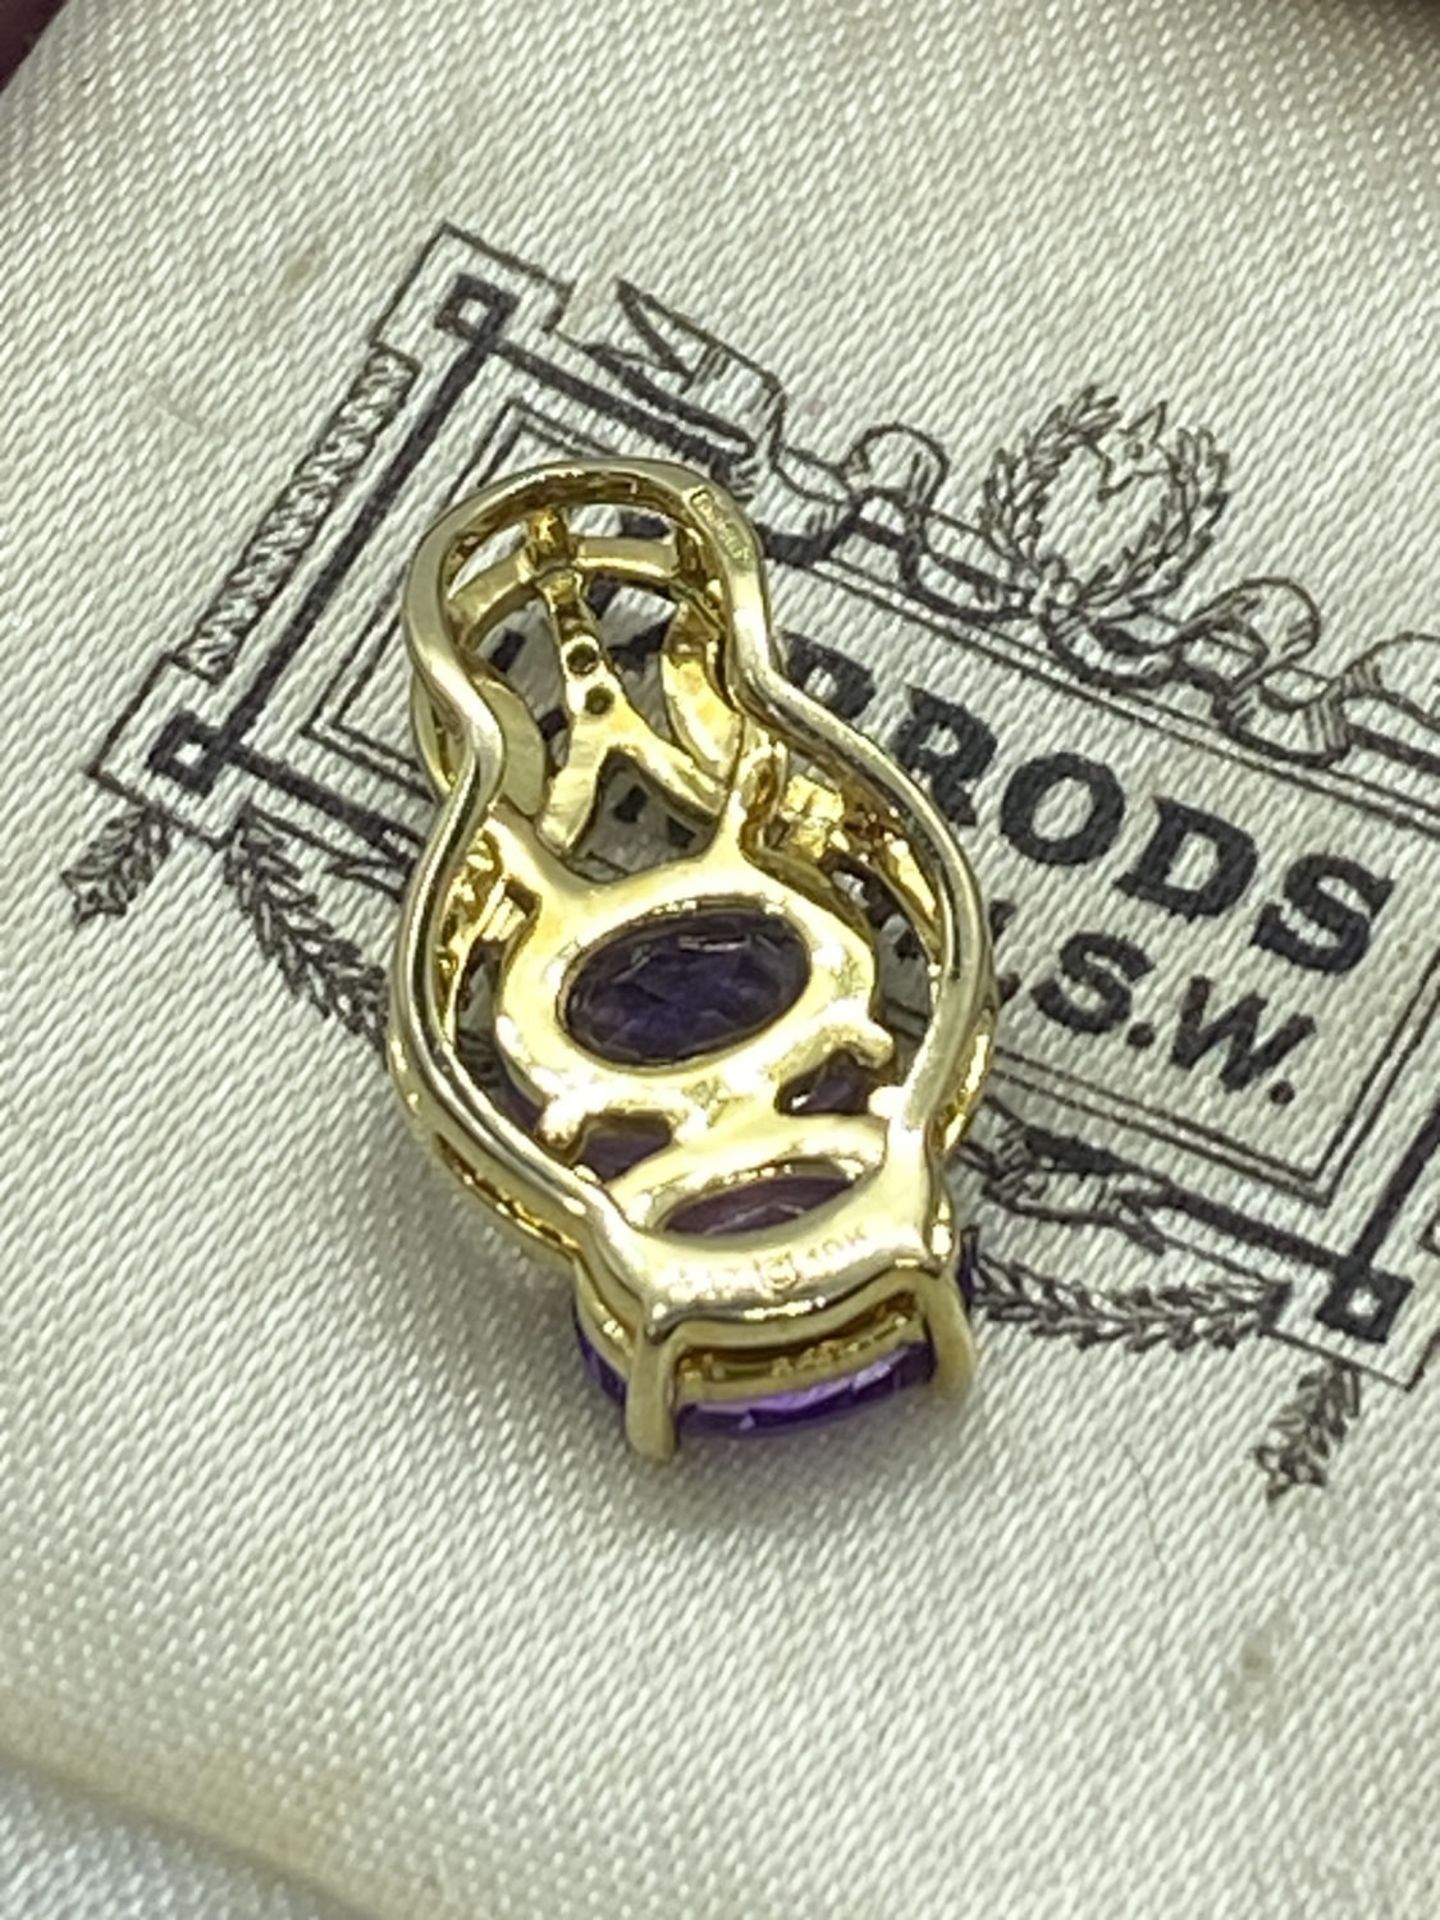 MOROCCAN AMETHYST 10ct YELLOW GOLD PENDANT APPROX. 20mm X 10mm - Image 2 of 2